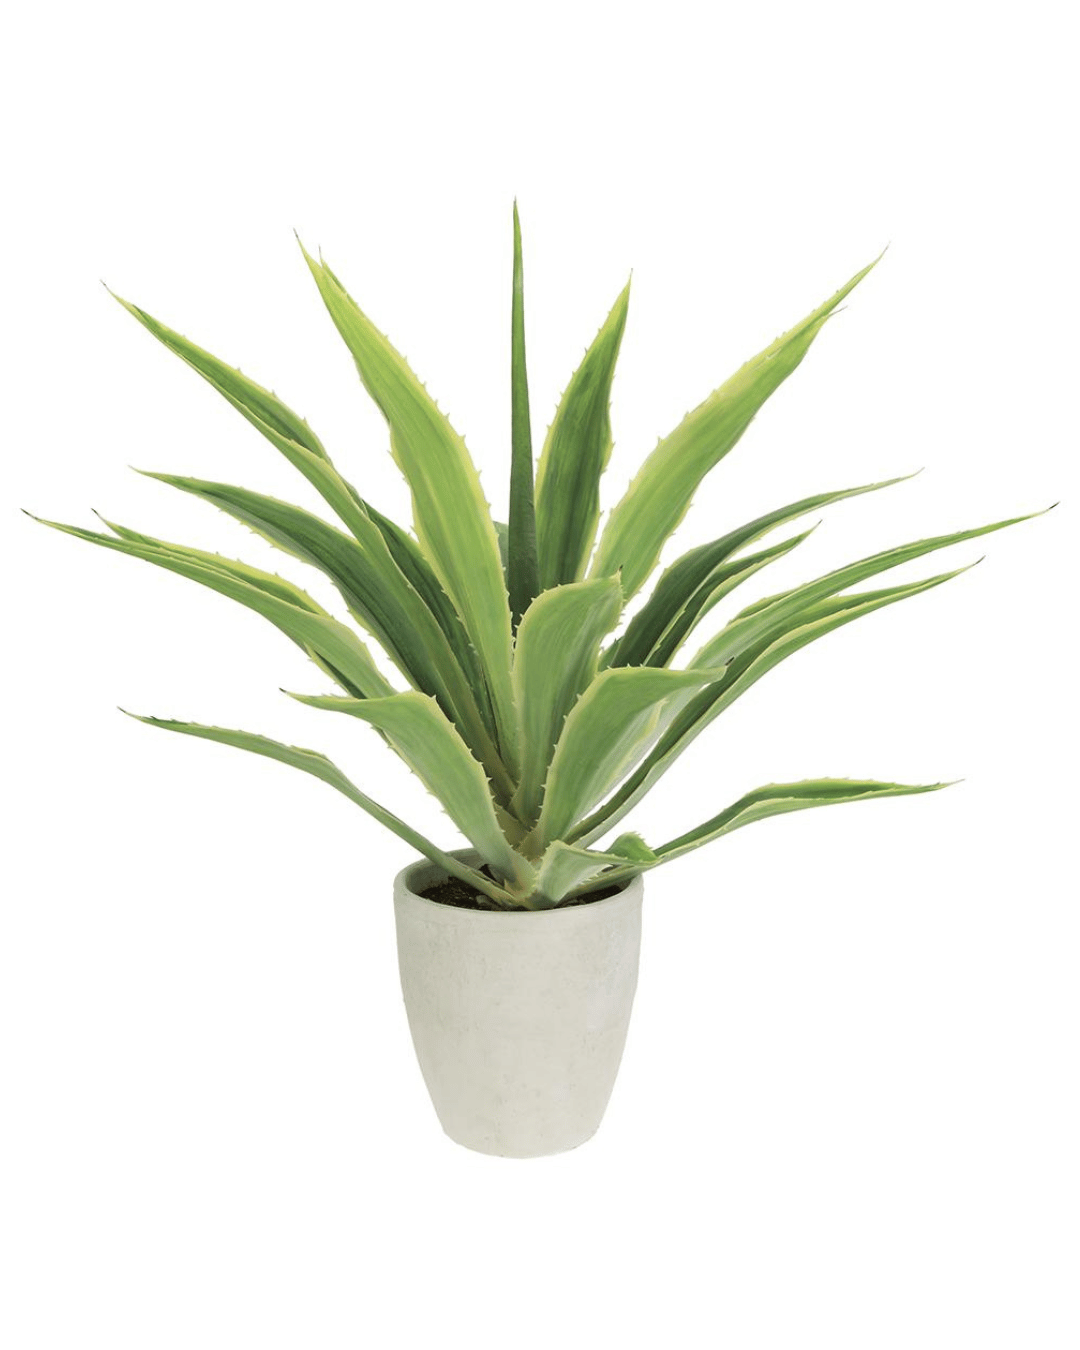 A vibrant 32&quot; Agave in Cement Pot with long, pointed leaves featuring light green edges, housed in a simple, white ceramic pot against a white background in a Scottsdale Arizona bungalow by AllState Floral And Craft.